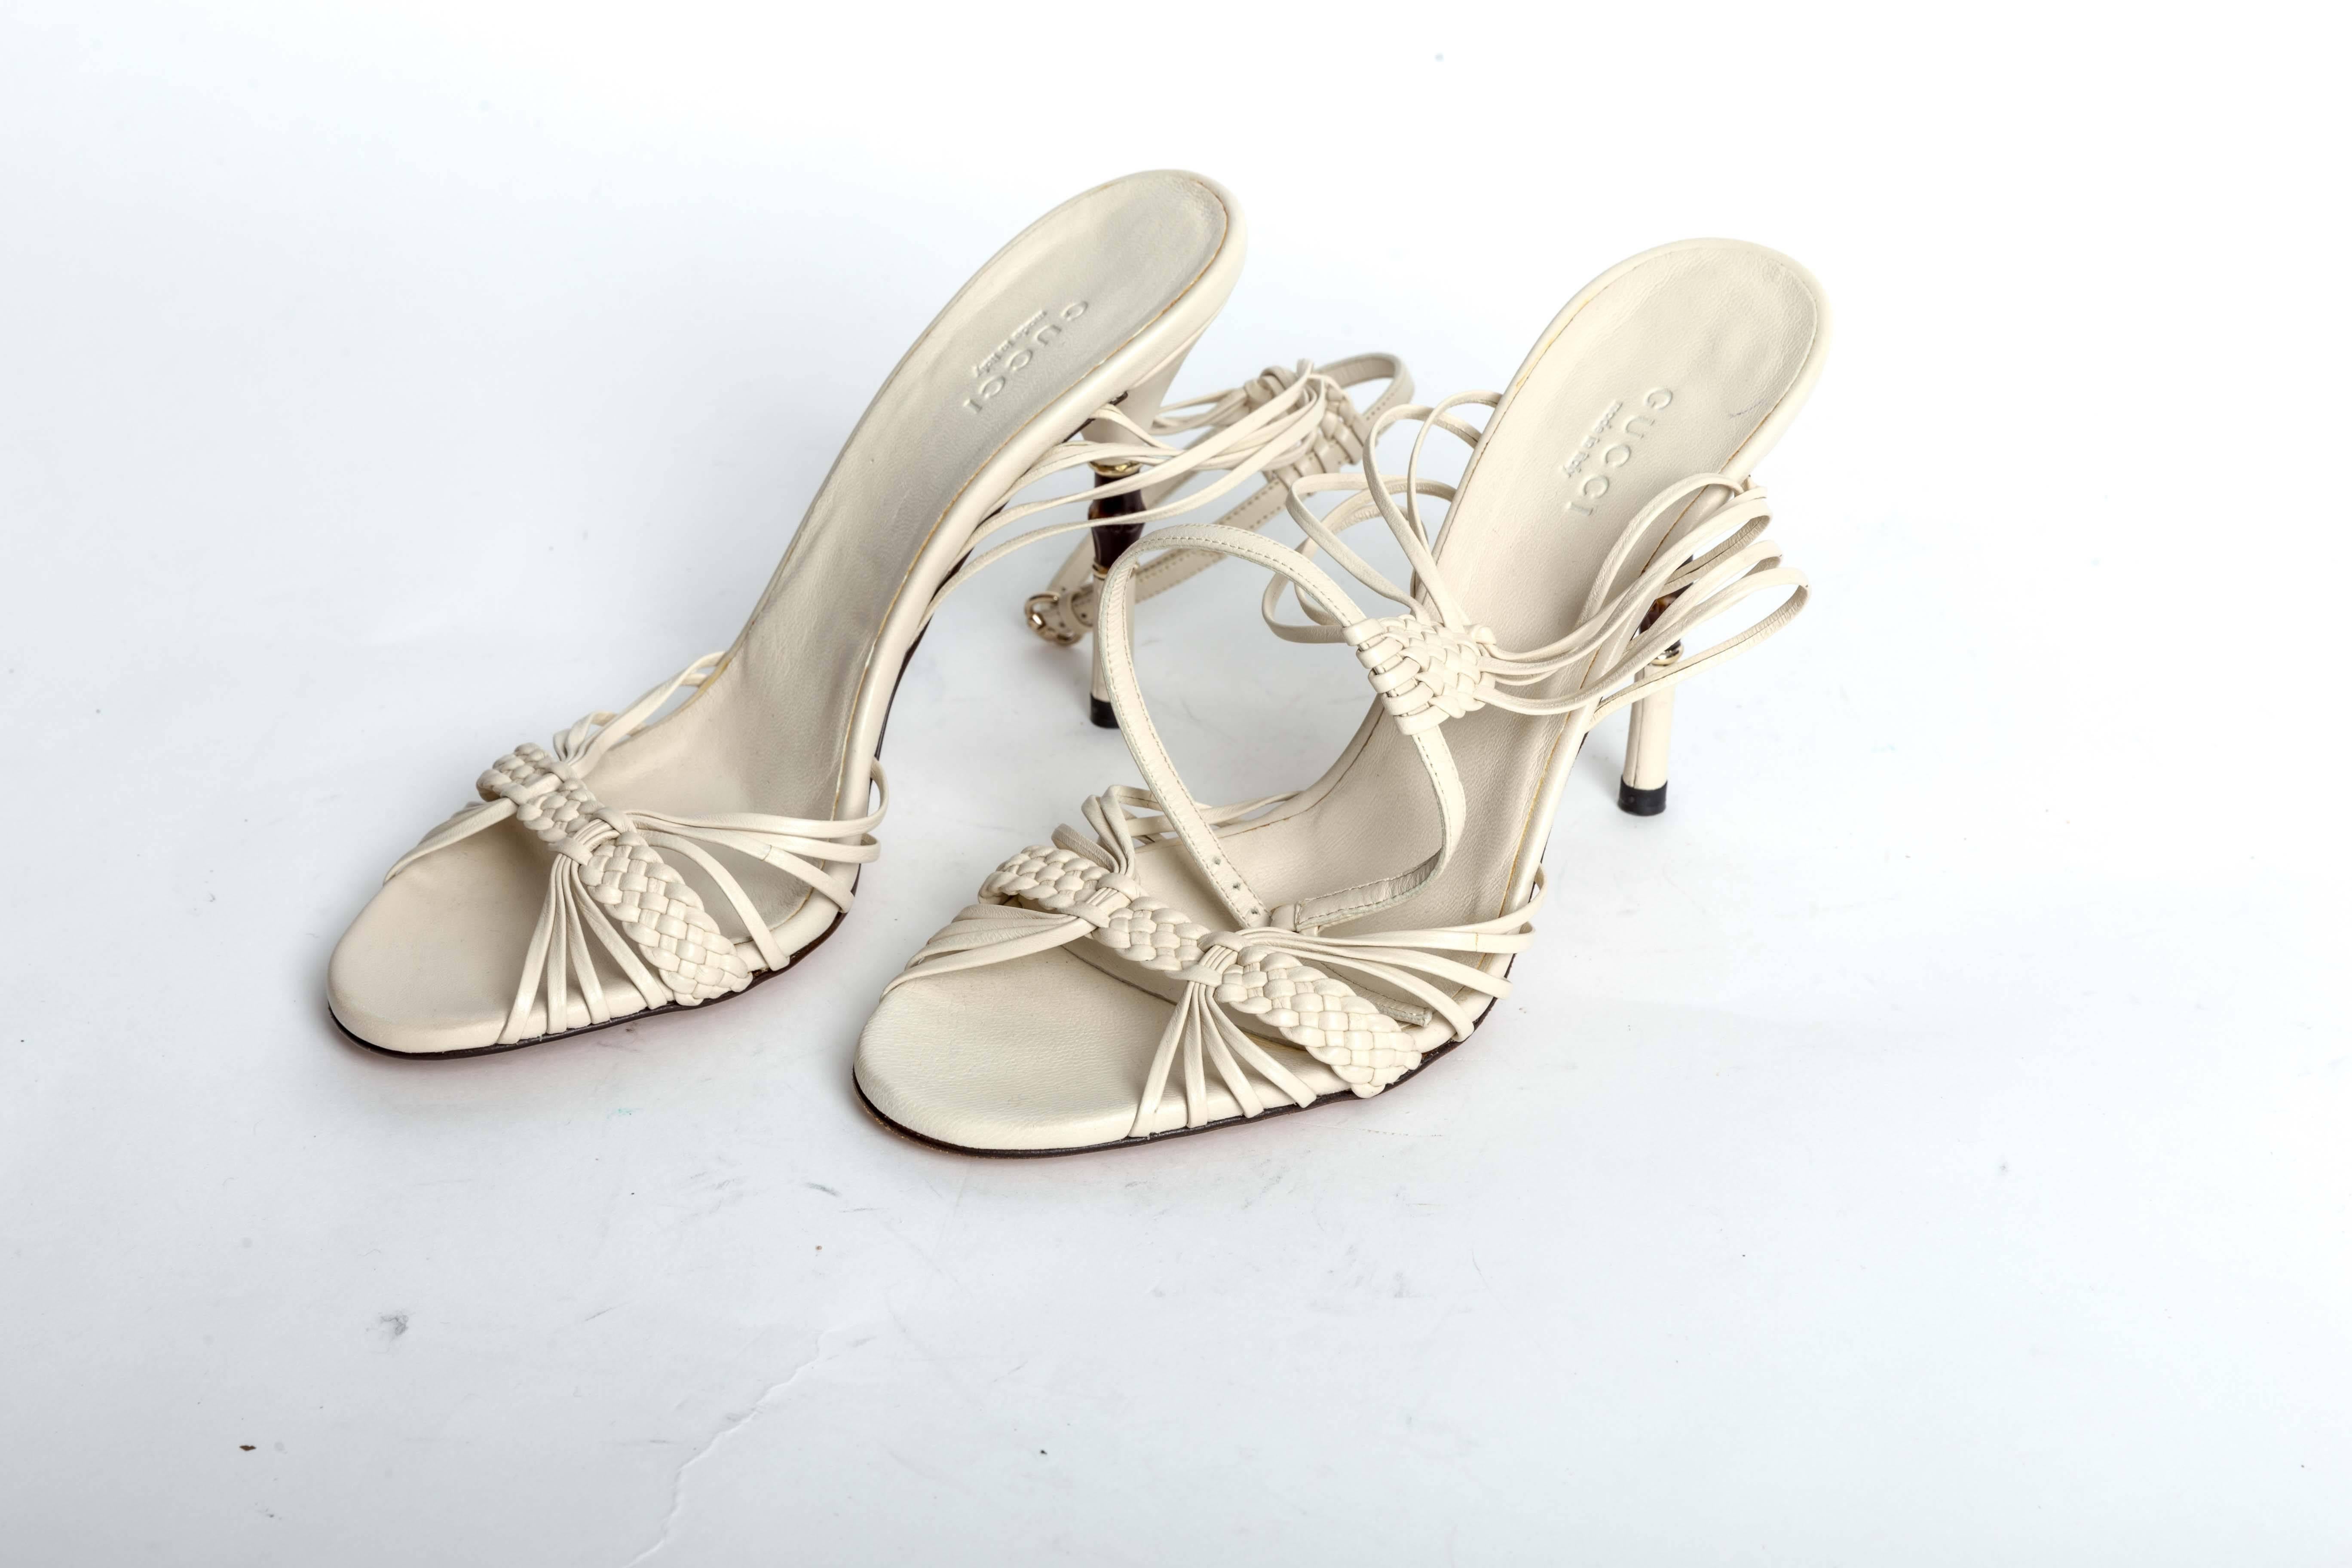 Off White Gucci Sandals with Bamboo Bead Heel Insert. The leather is braided and heel height is 4 inches.